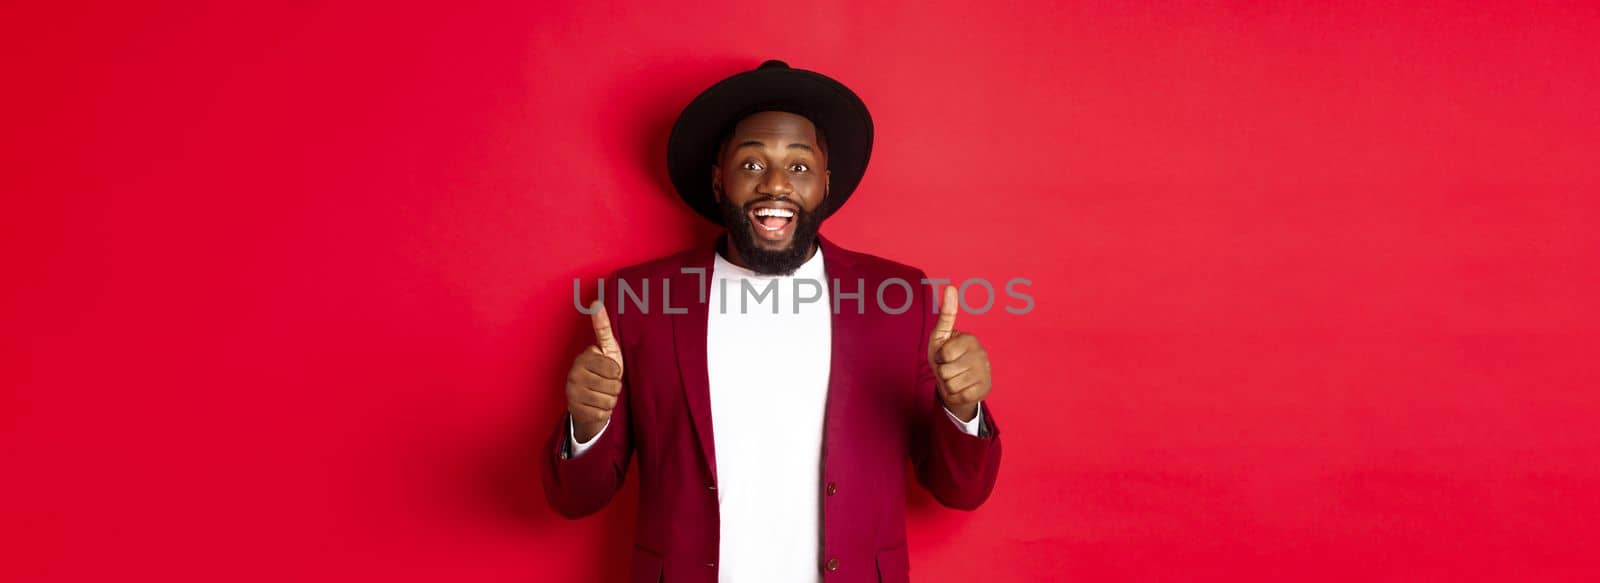 Christmas shopping and people concept. Handsome Black man smiling satisfied, showing thumbs-up, like and agree, approve something, standing against red background.